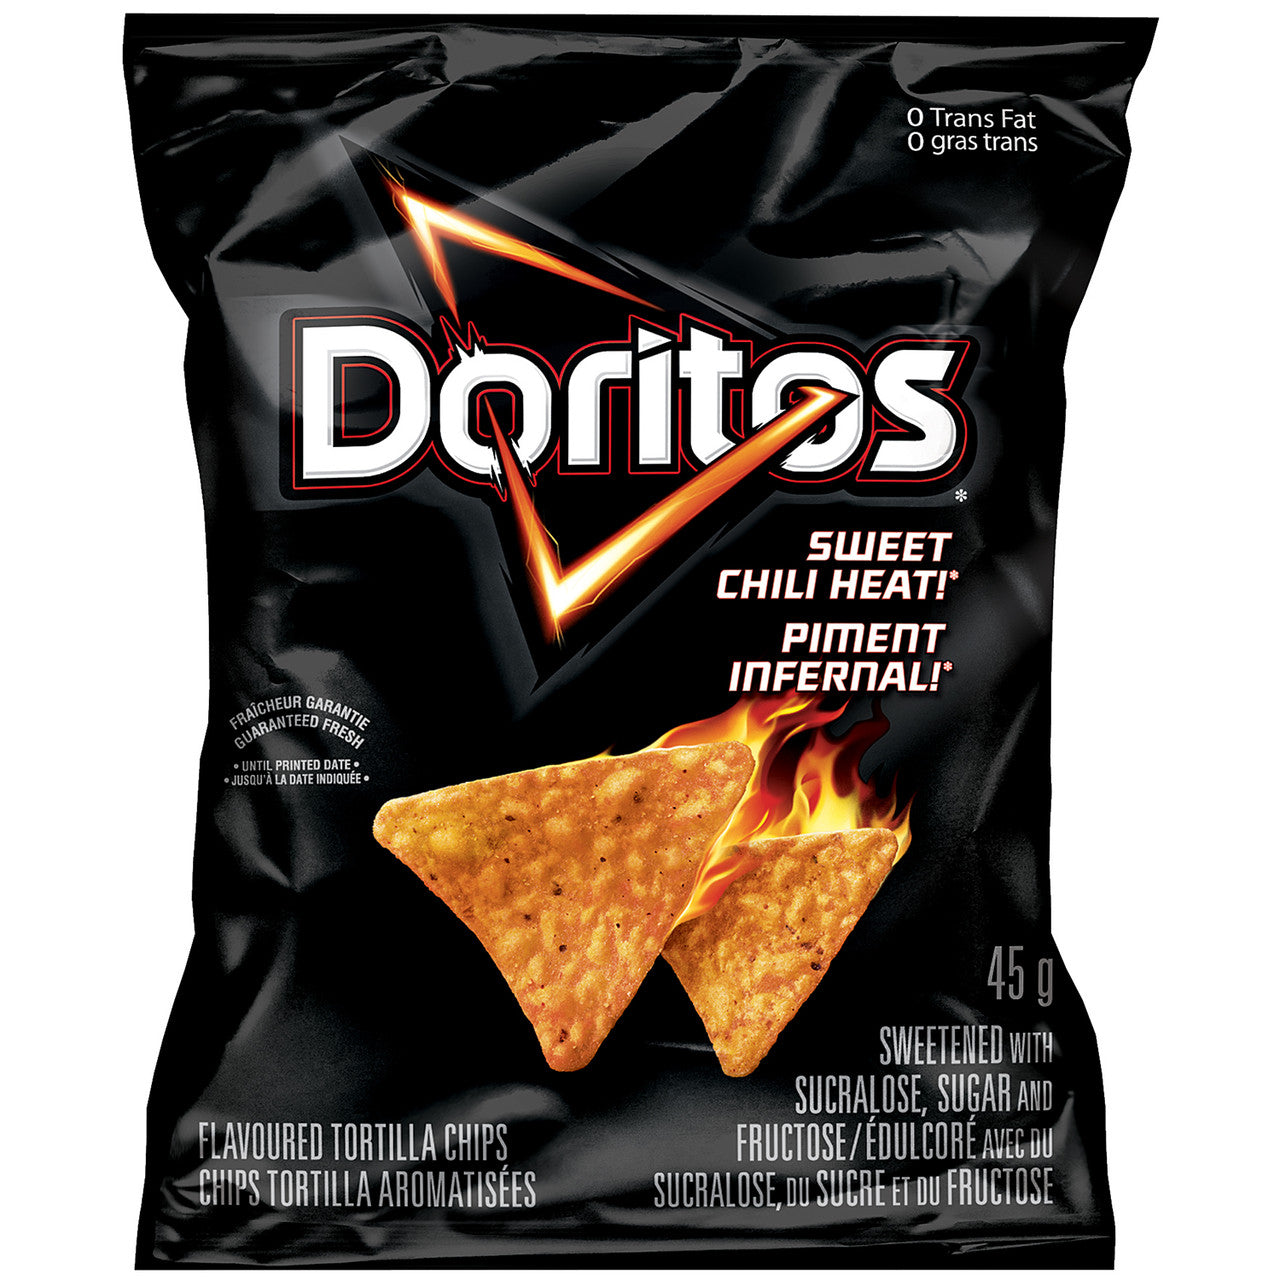 Doritos Sweet Chili Heat Tortilla Chips, 45g/1.6 oz., Vending Size {Imported from Canada}